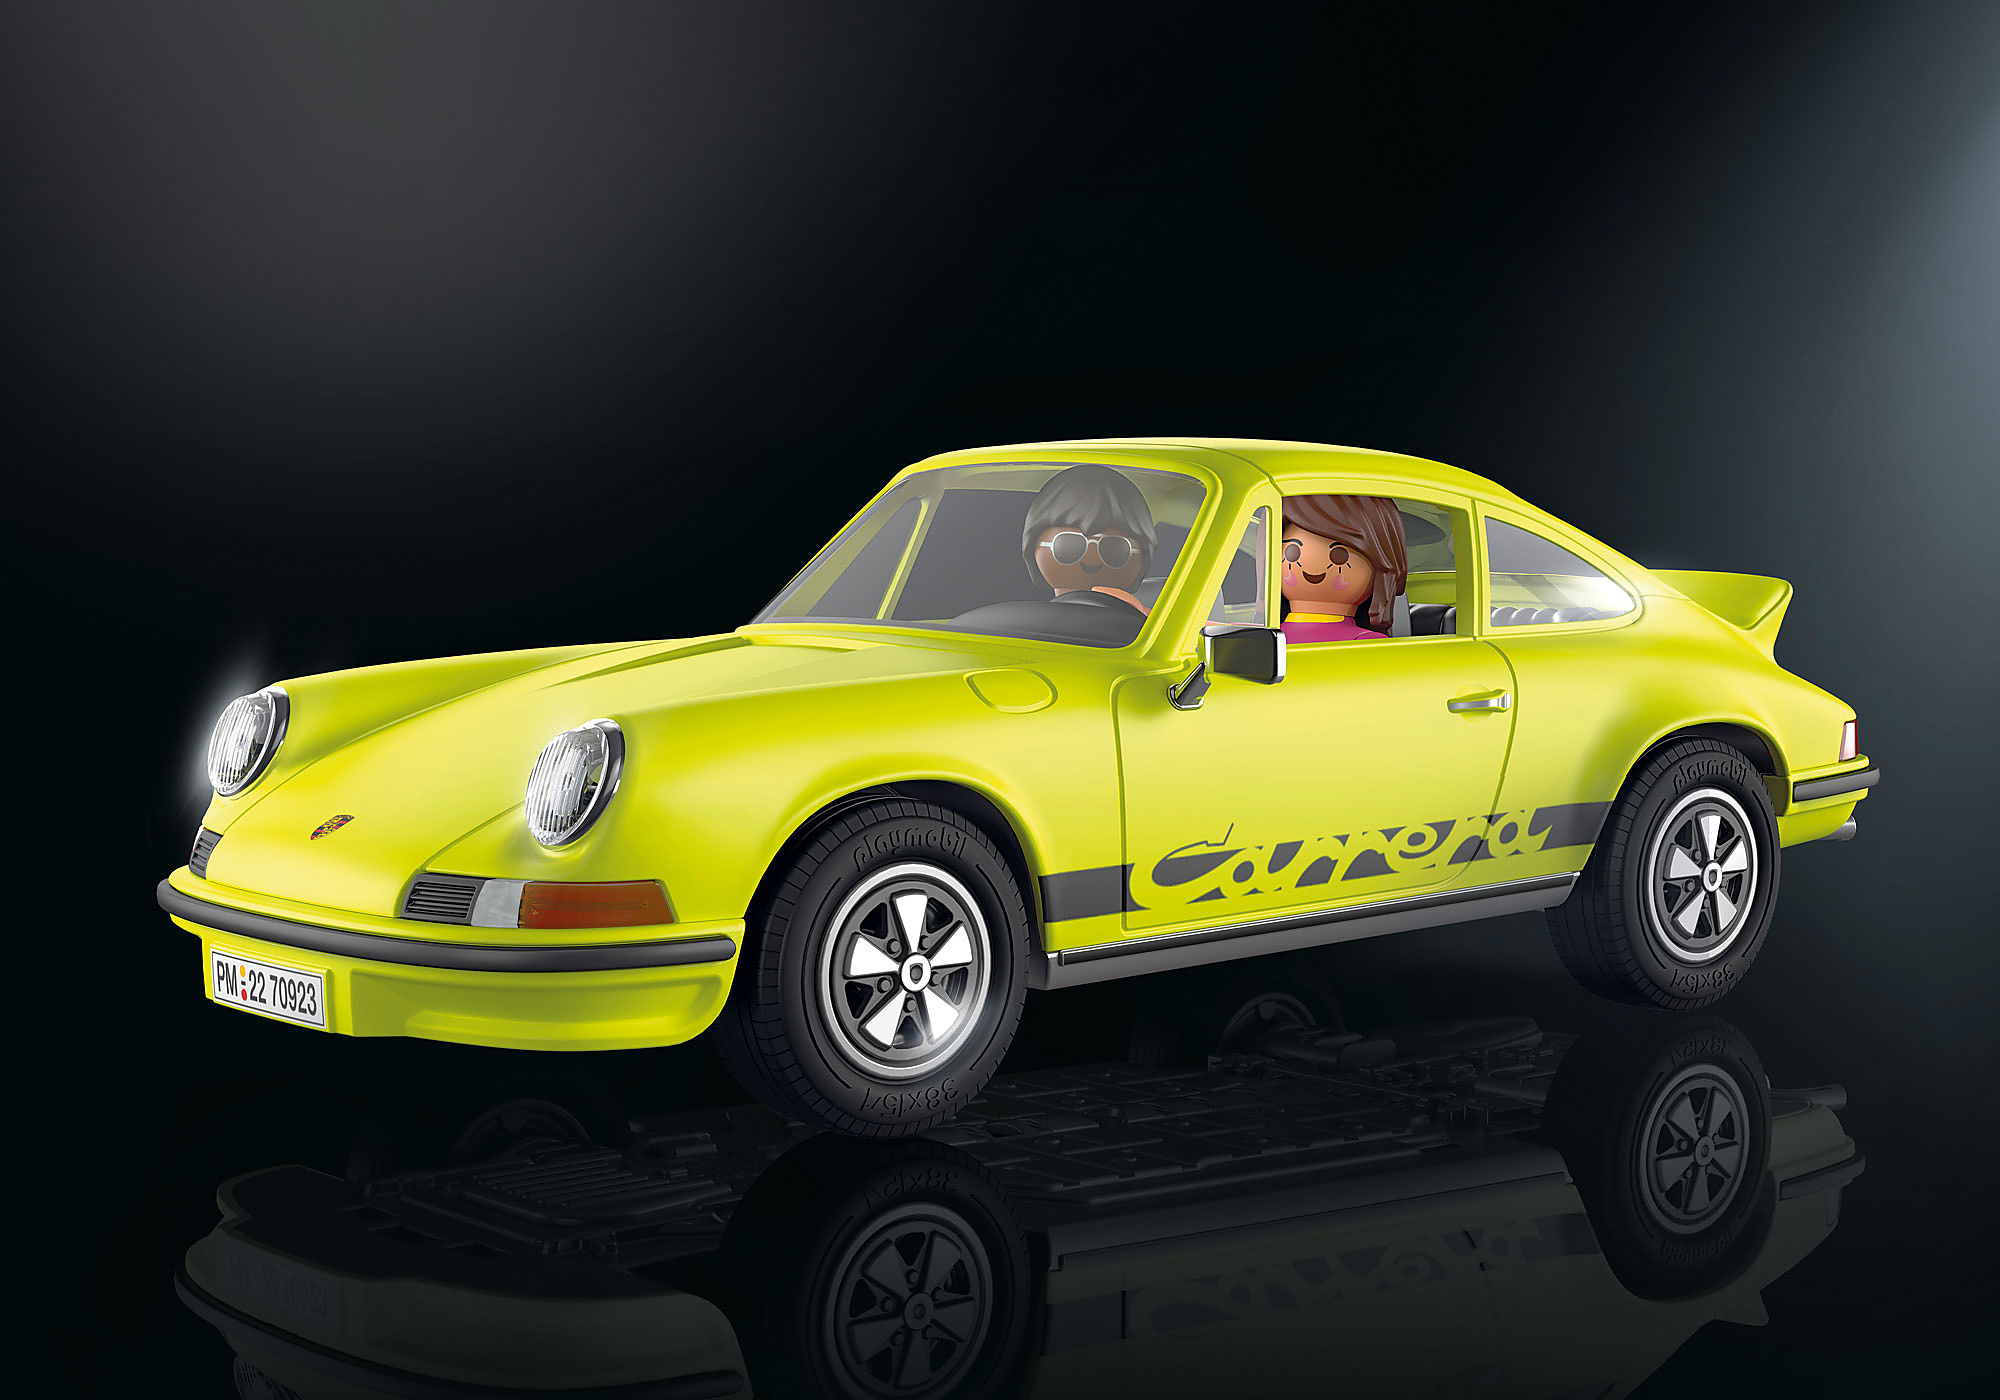 PLAYMOBIL launches Porsche 911 Carrera RS 2.7 - Mike Brewer Motoring